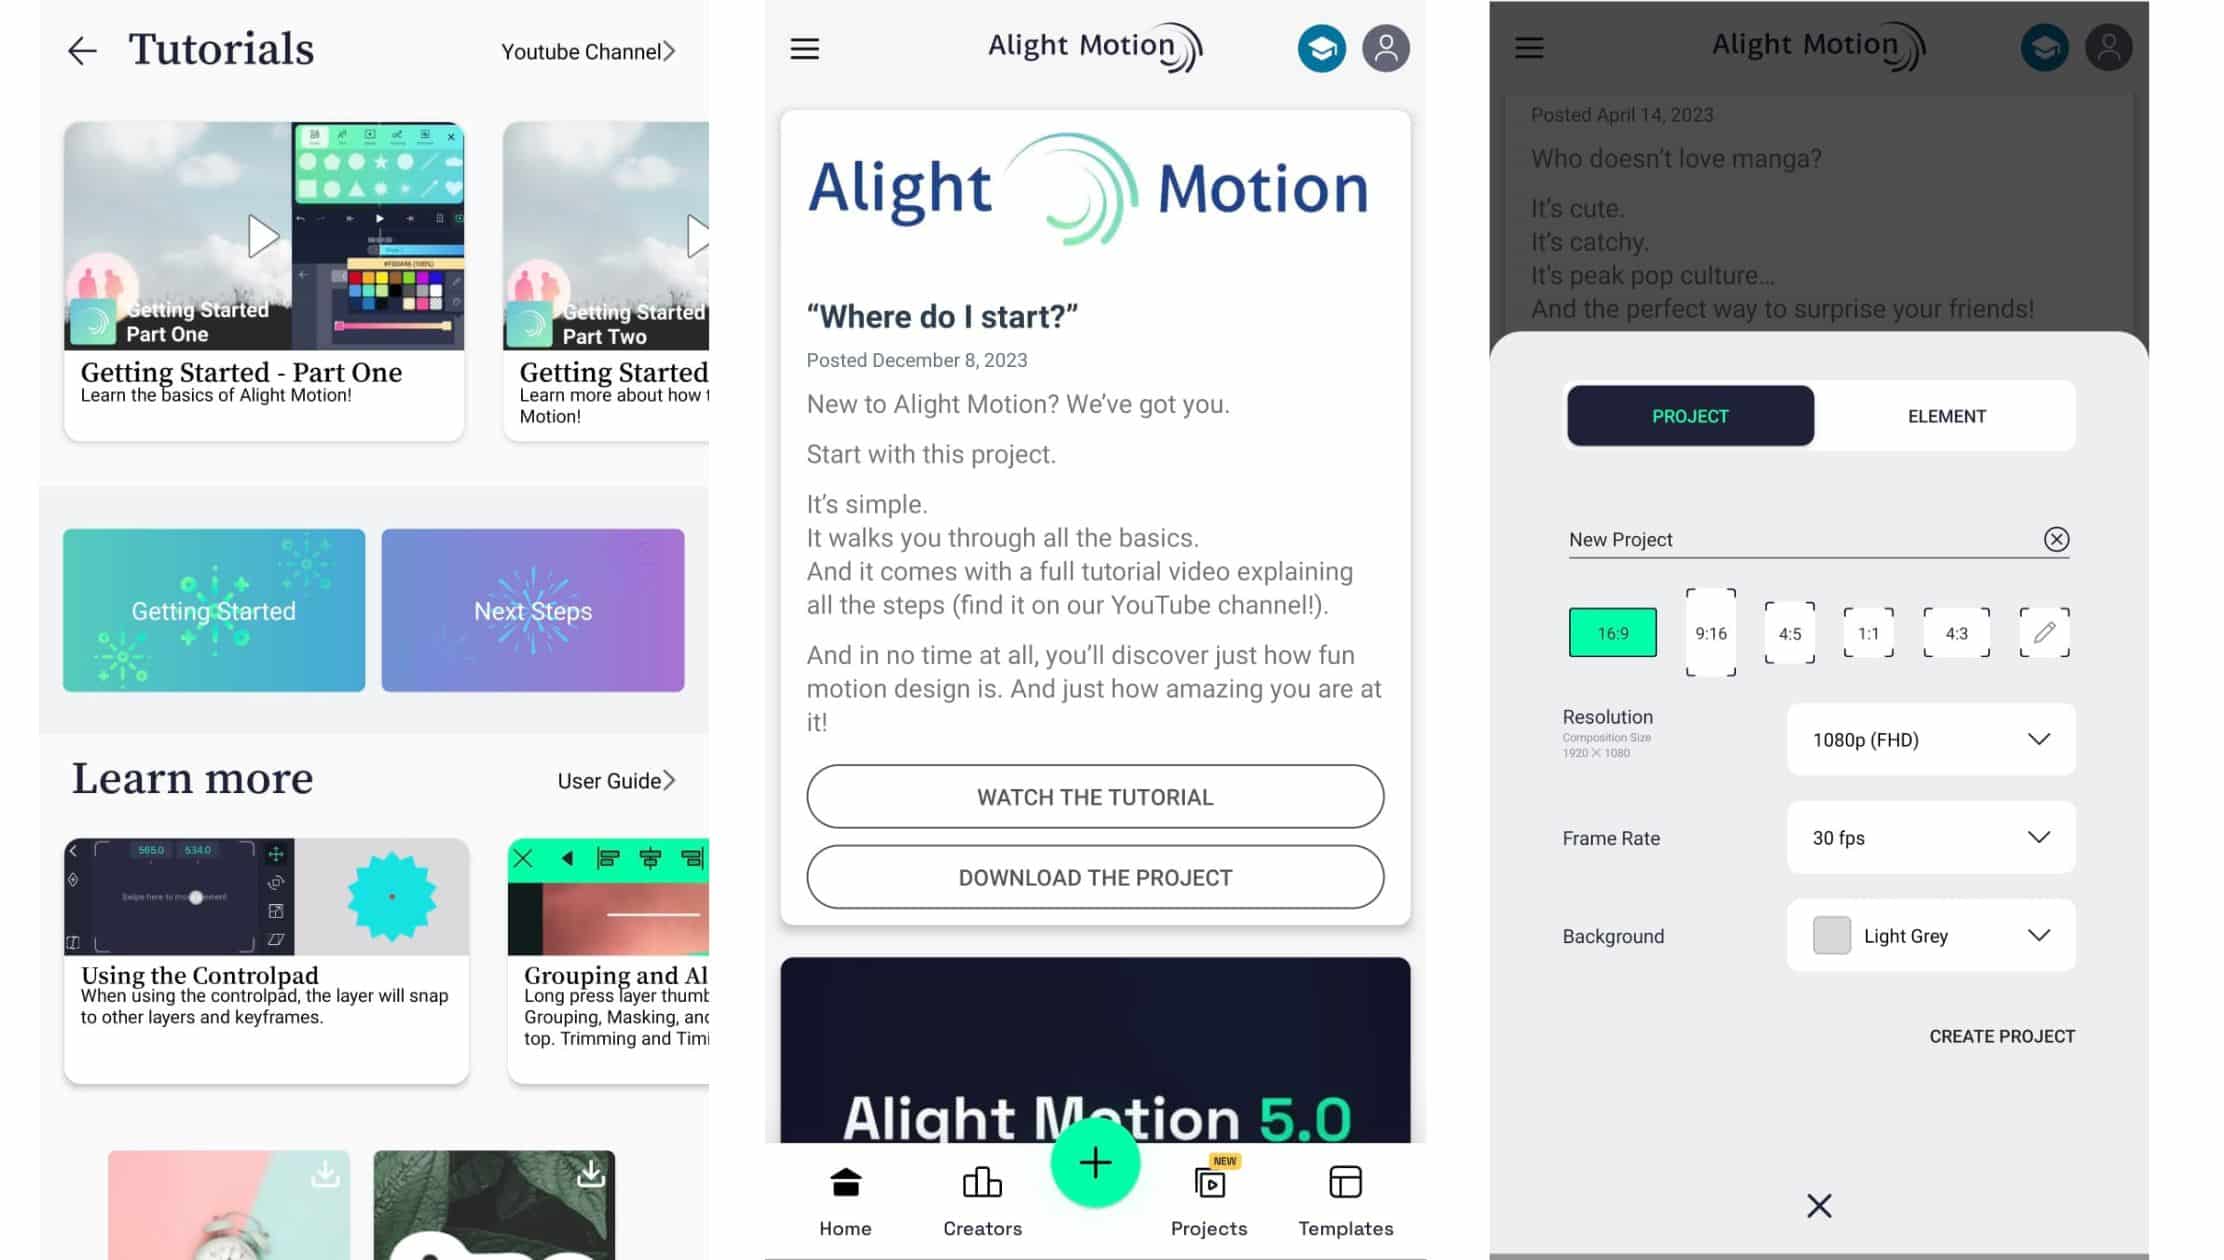 Features of Alight Motion pro